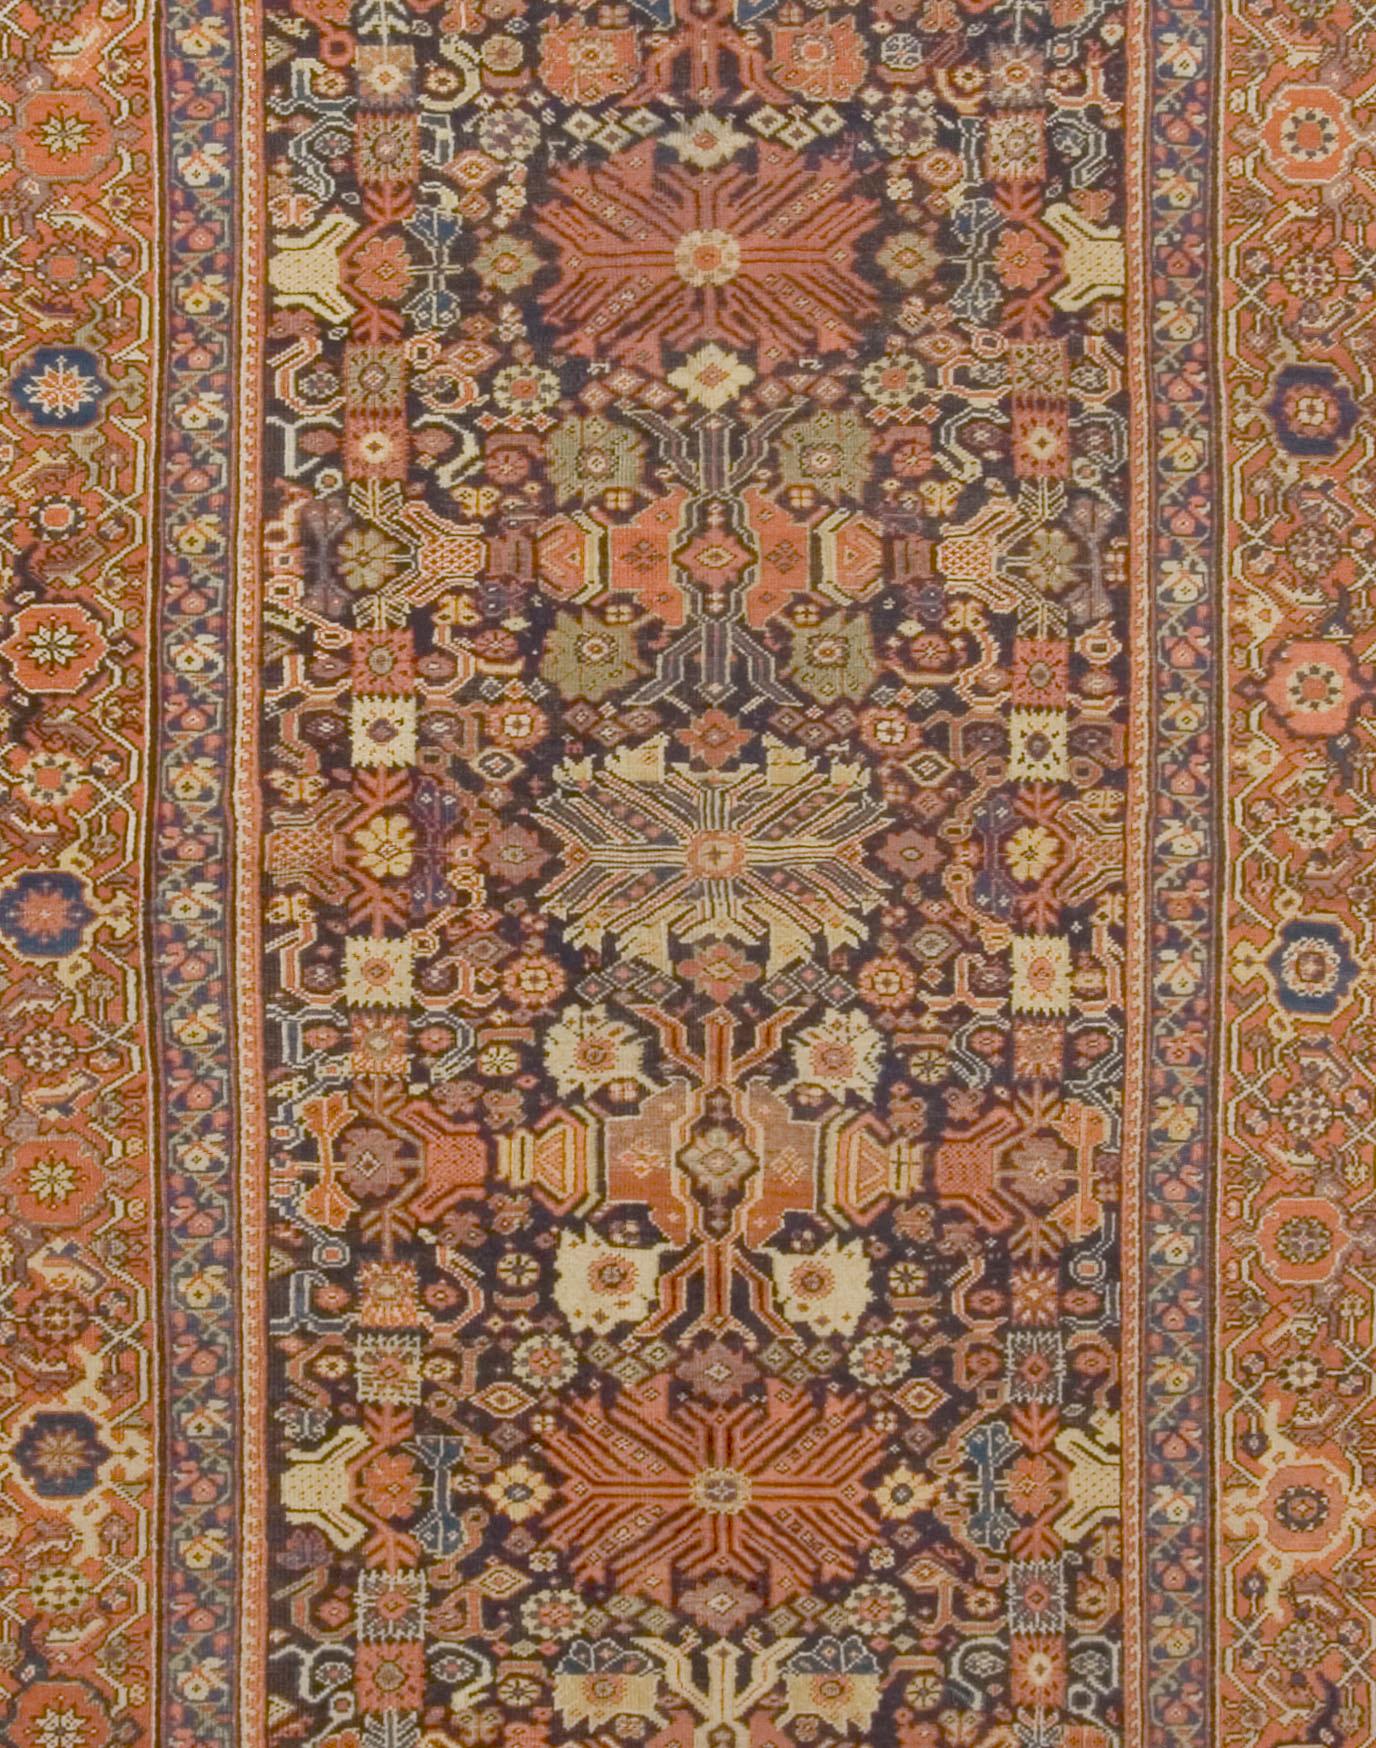 Persian Feraghan rug runner, circa 1880, 6' x 12'8. A lovely hand-knotted antique Feraghan rug. With navy blues and shades of reds. Now in Markazi Province, west Persia, the Feraghan district has woven a variety of styles and textures from good to